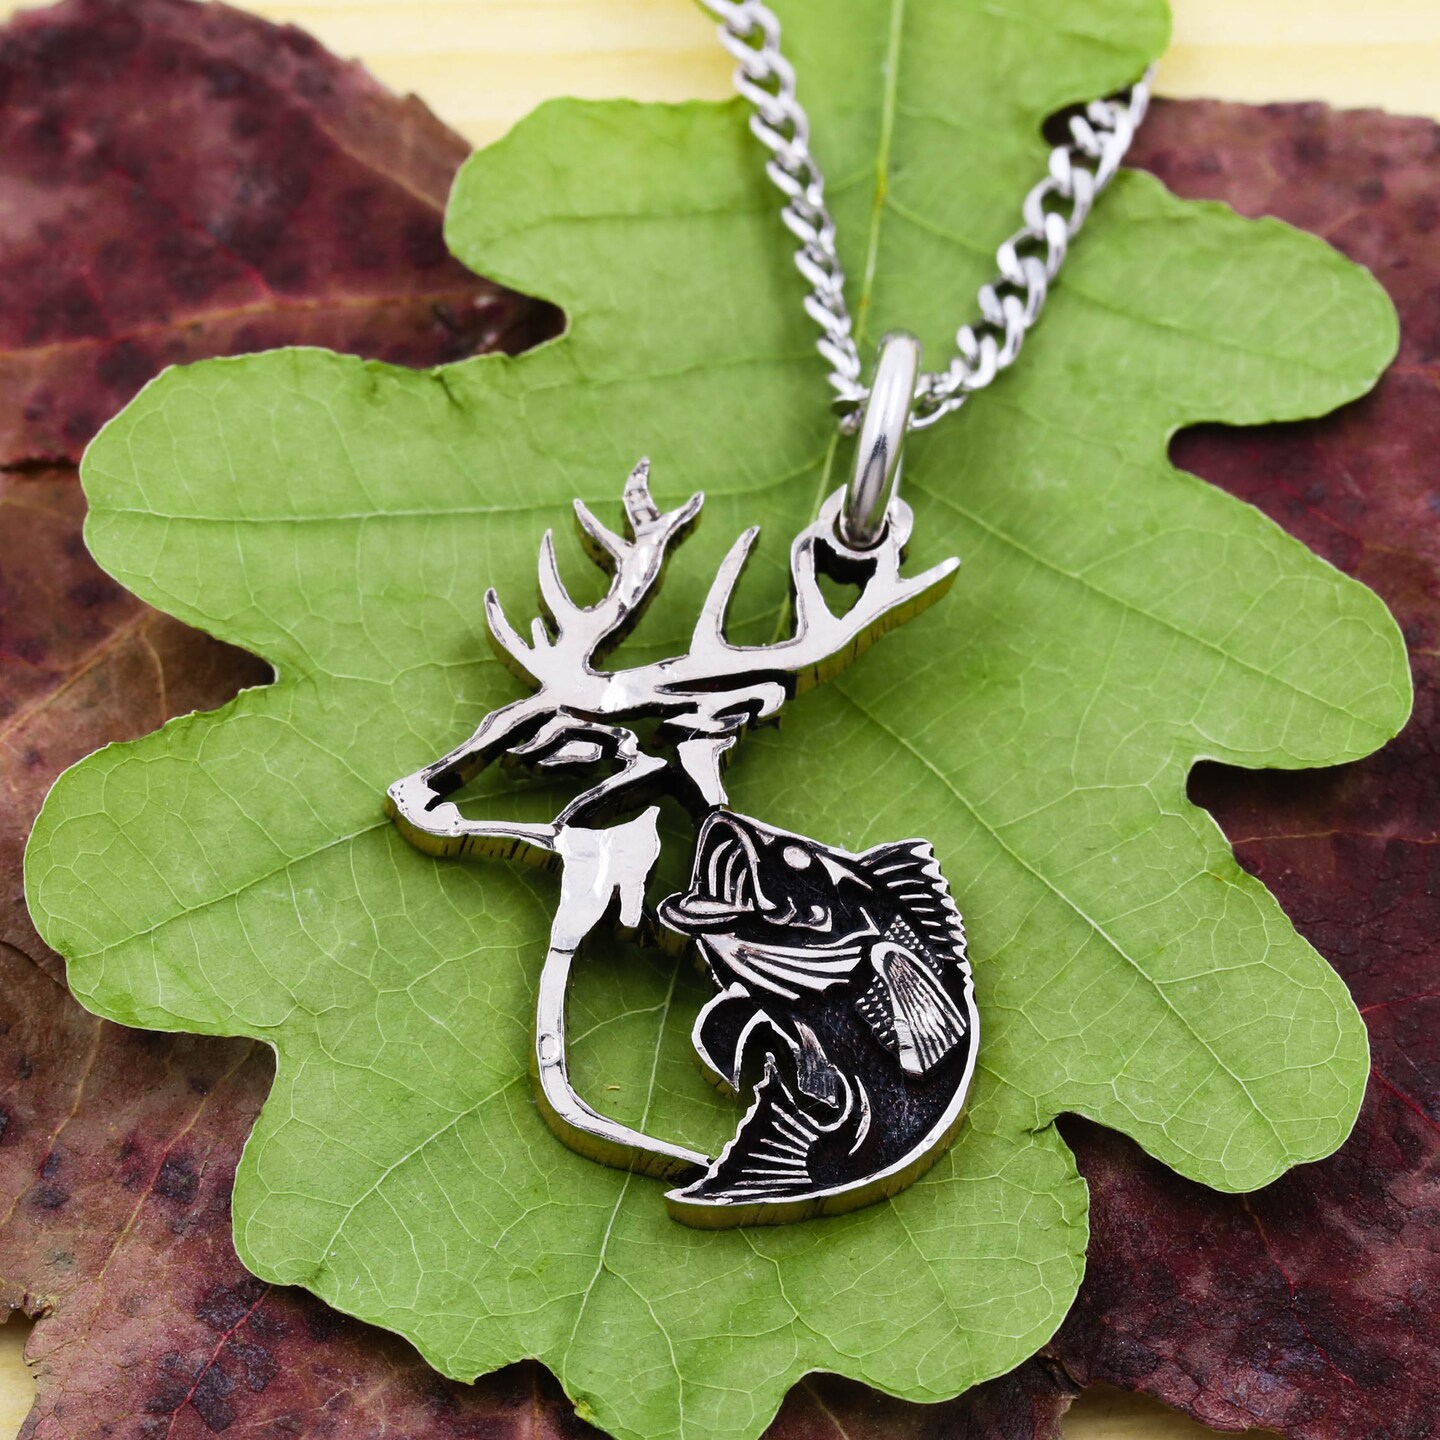 Buck Deer and Bass Fish Necklace, Hunting and Fishing Jewelry, Gift For Hunters  and Fishers, Engraved Hand Cut Coin, By NameCoins